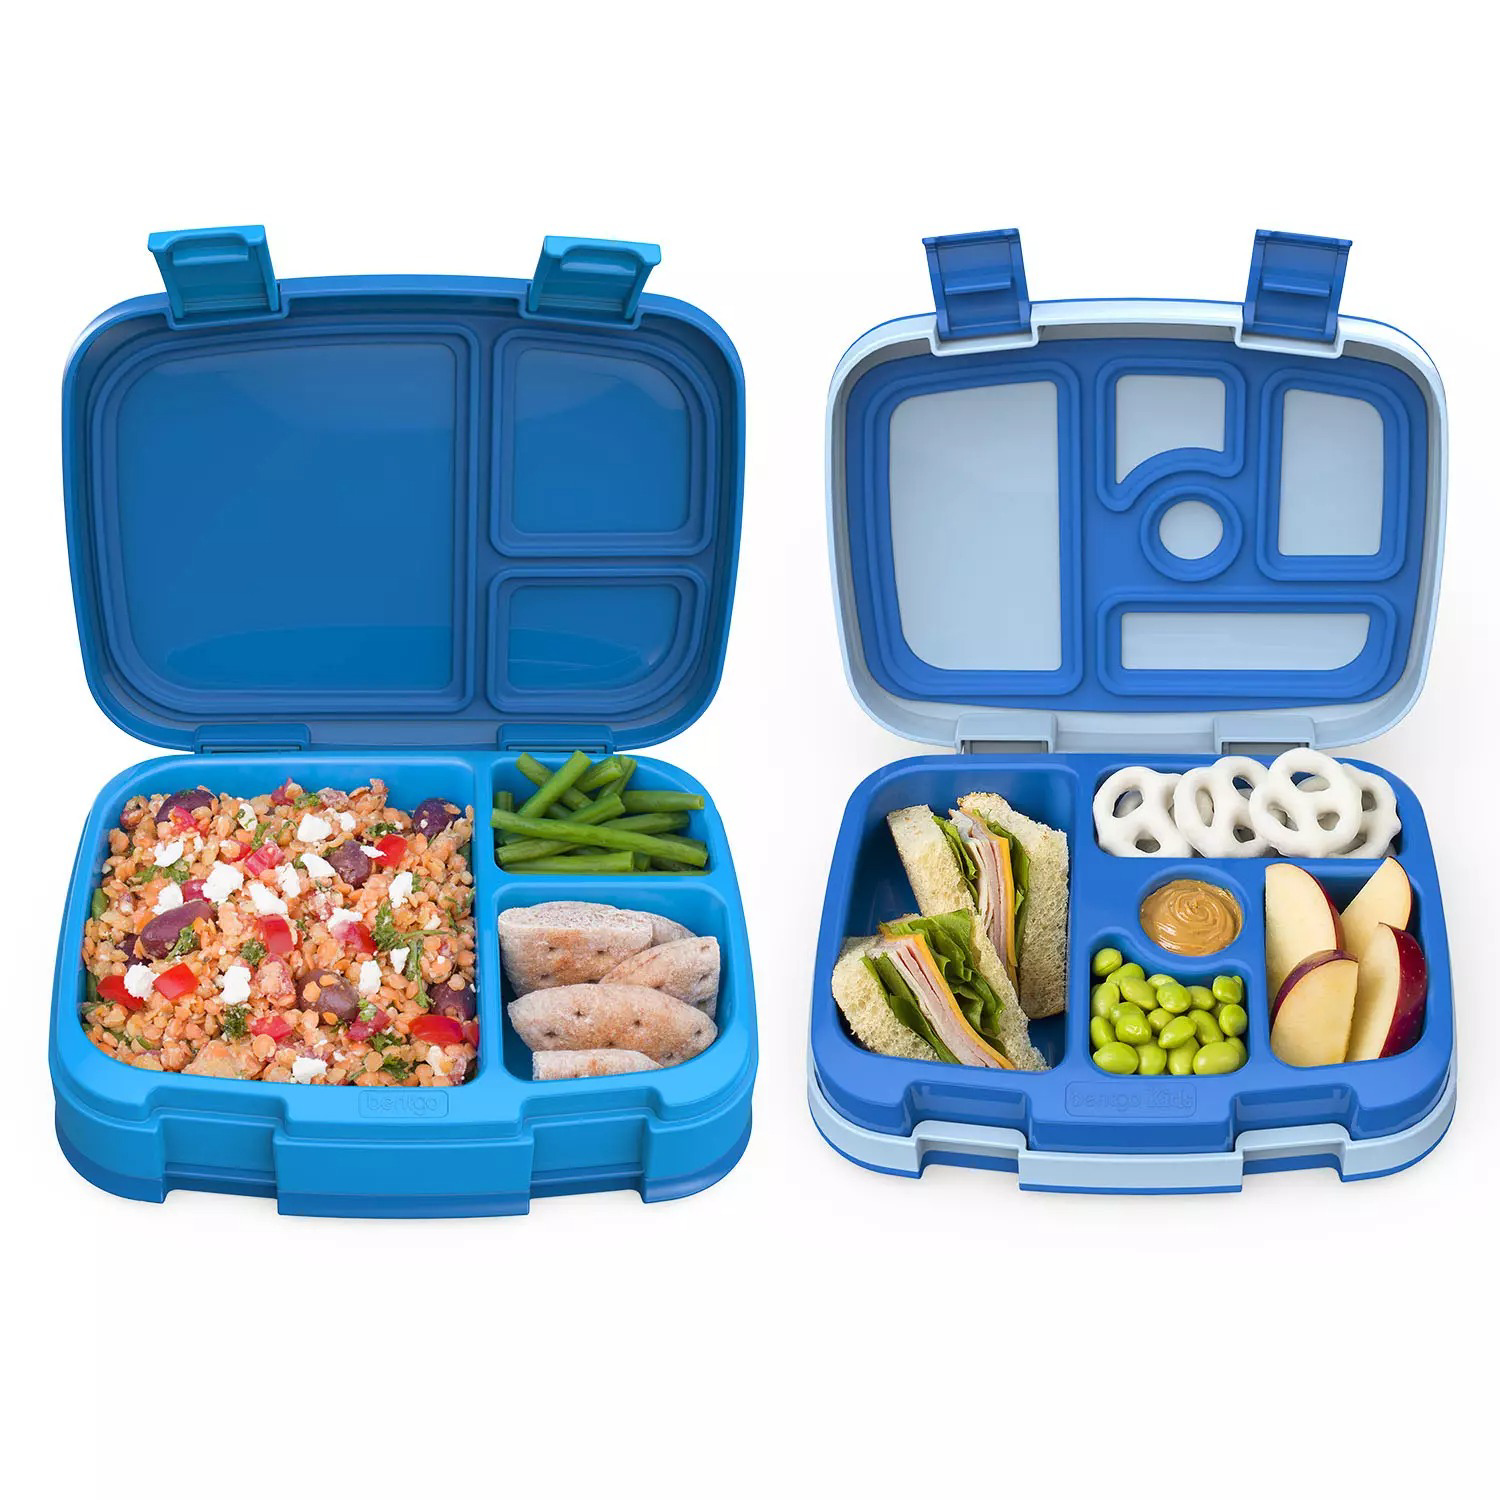 https://usa-angel.com/images/thumbs/001/0012756_one-bentgo-fresh-and-one-bentgo-kids-bento-lunch-box-assorted-colors.jpeg